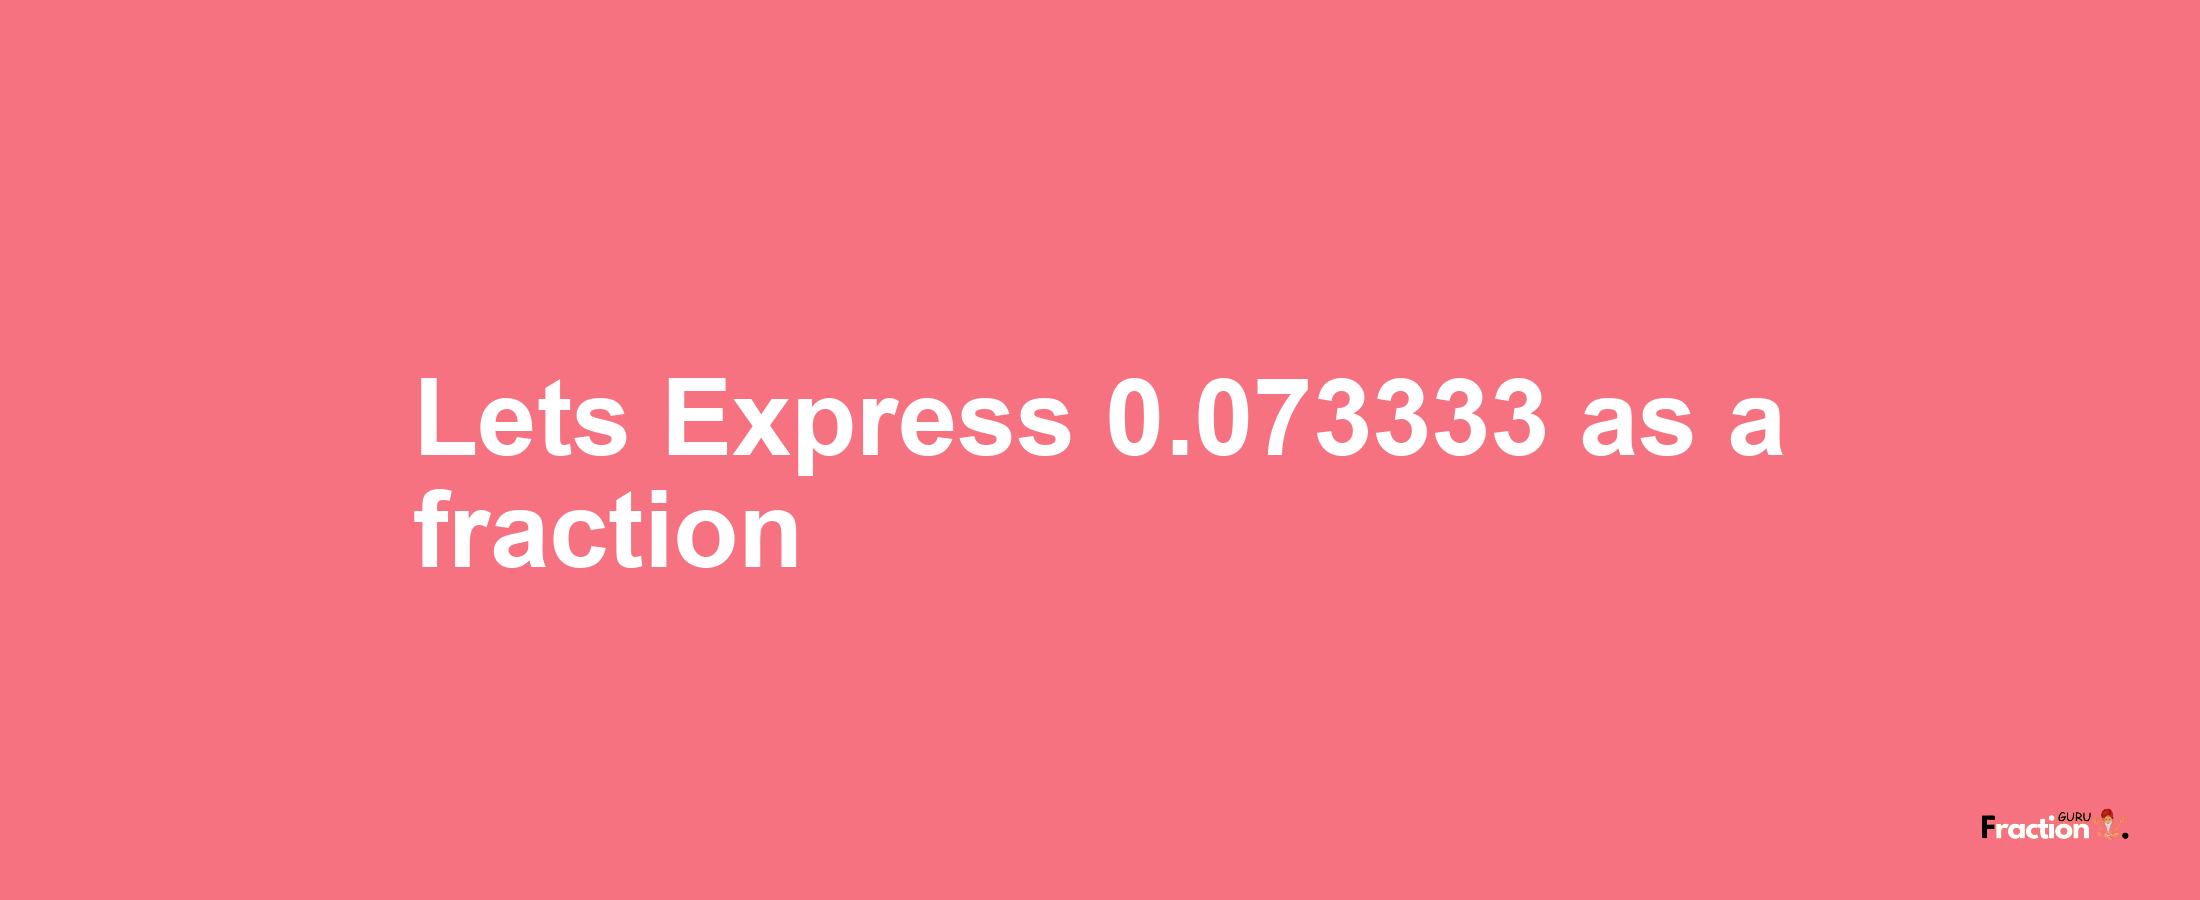 Lets Express 0.073333 as afraction